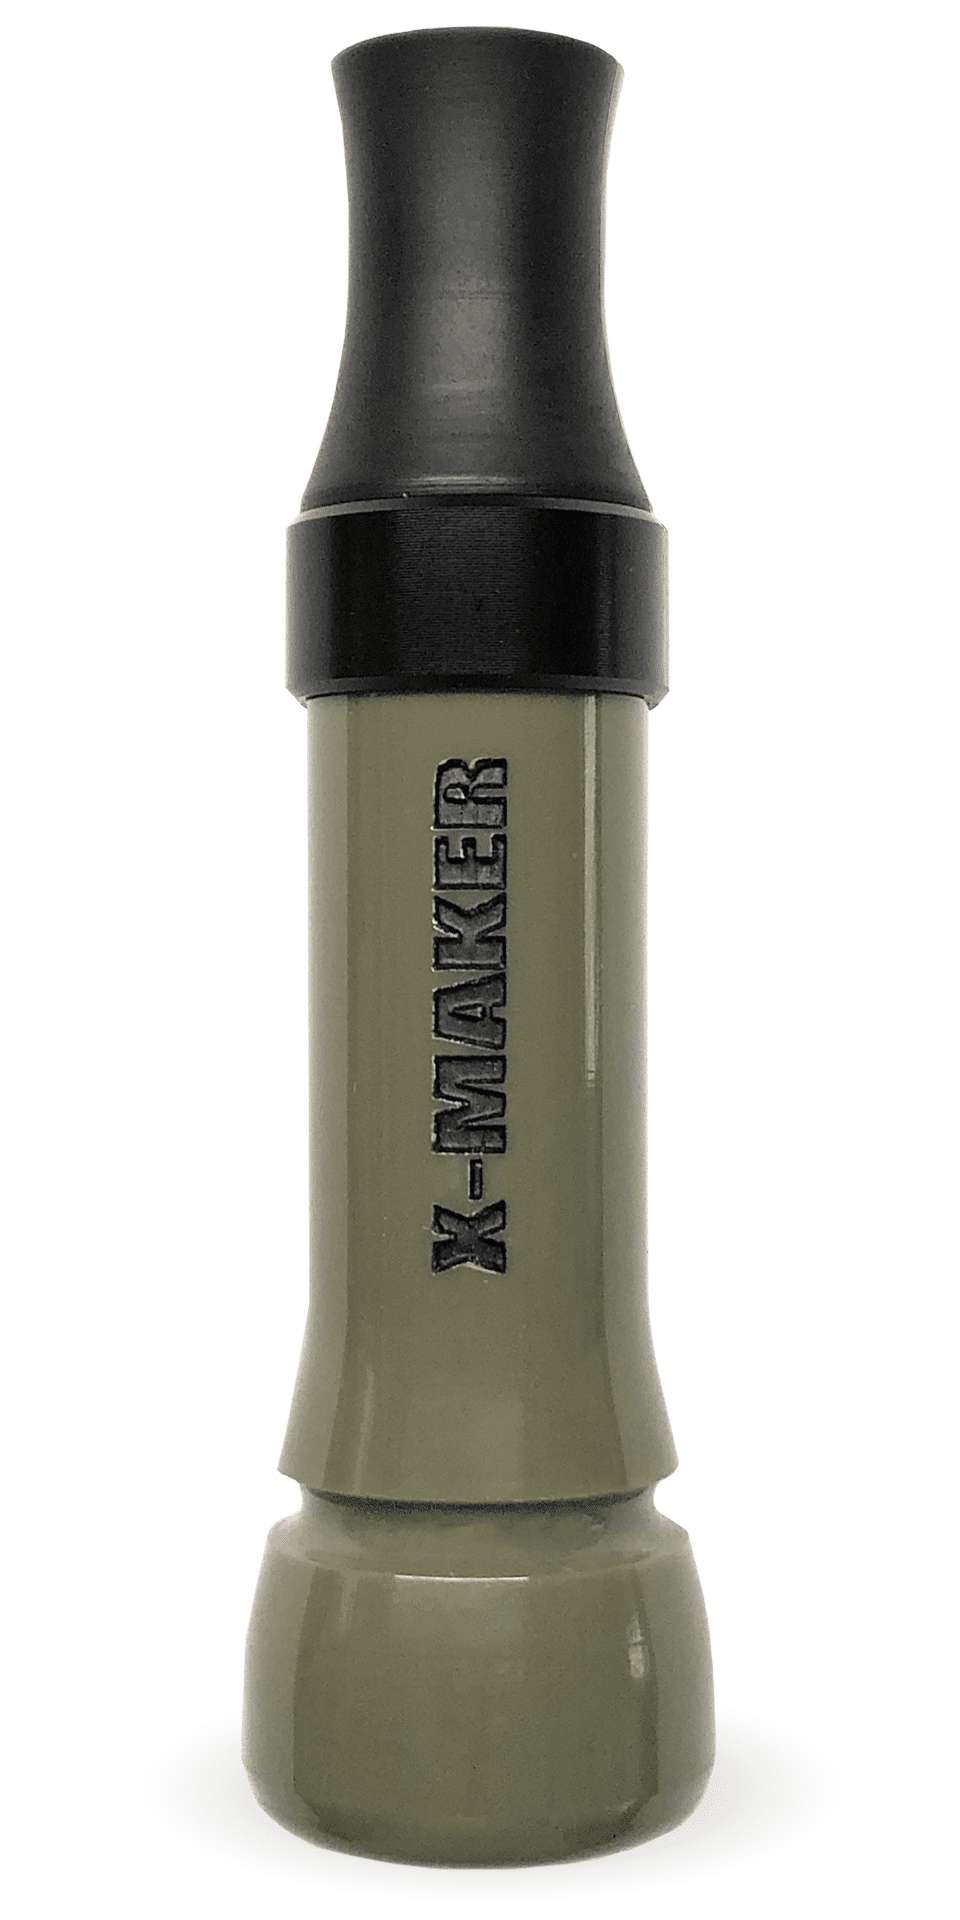 X-MAKER Cut-Down Duck Call in Olive Drab OD, complemented by a Black Anodized Band and Threaded Cast Acrylic Flared Keyhole Insert. These calls are celebrated for their responsiveness, delivering excellent high and low-end tones with impressive volume. They offer a smooth and user-friendly experience, designed meticulously by Kirk McCullough. Recognized as the best and easiest duck calls available, proudly made in Arkansas.